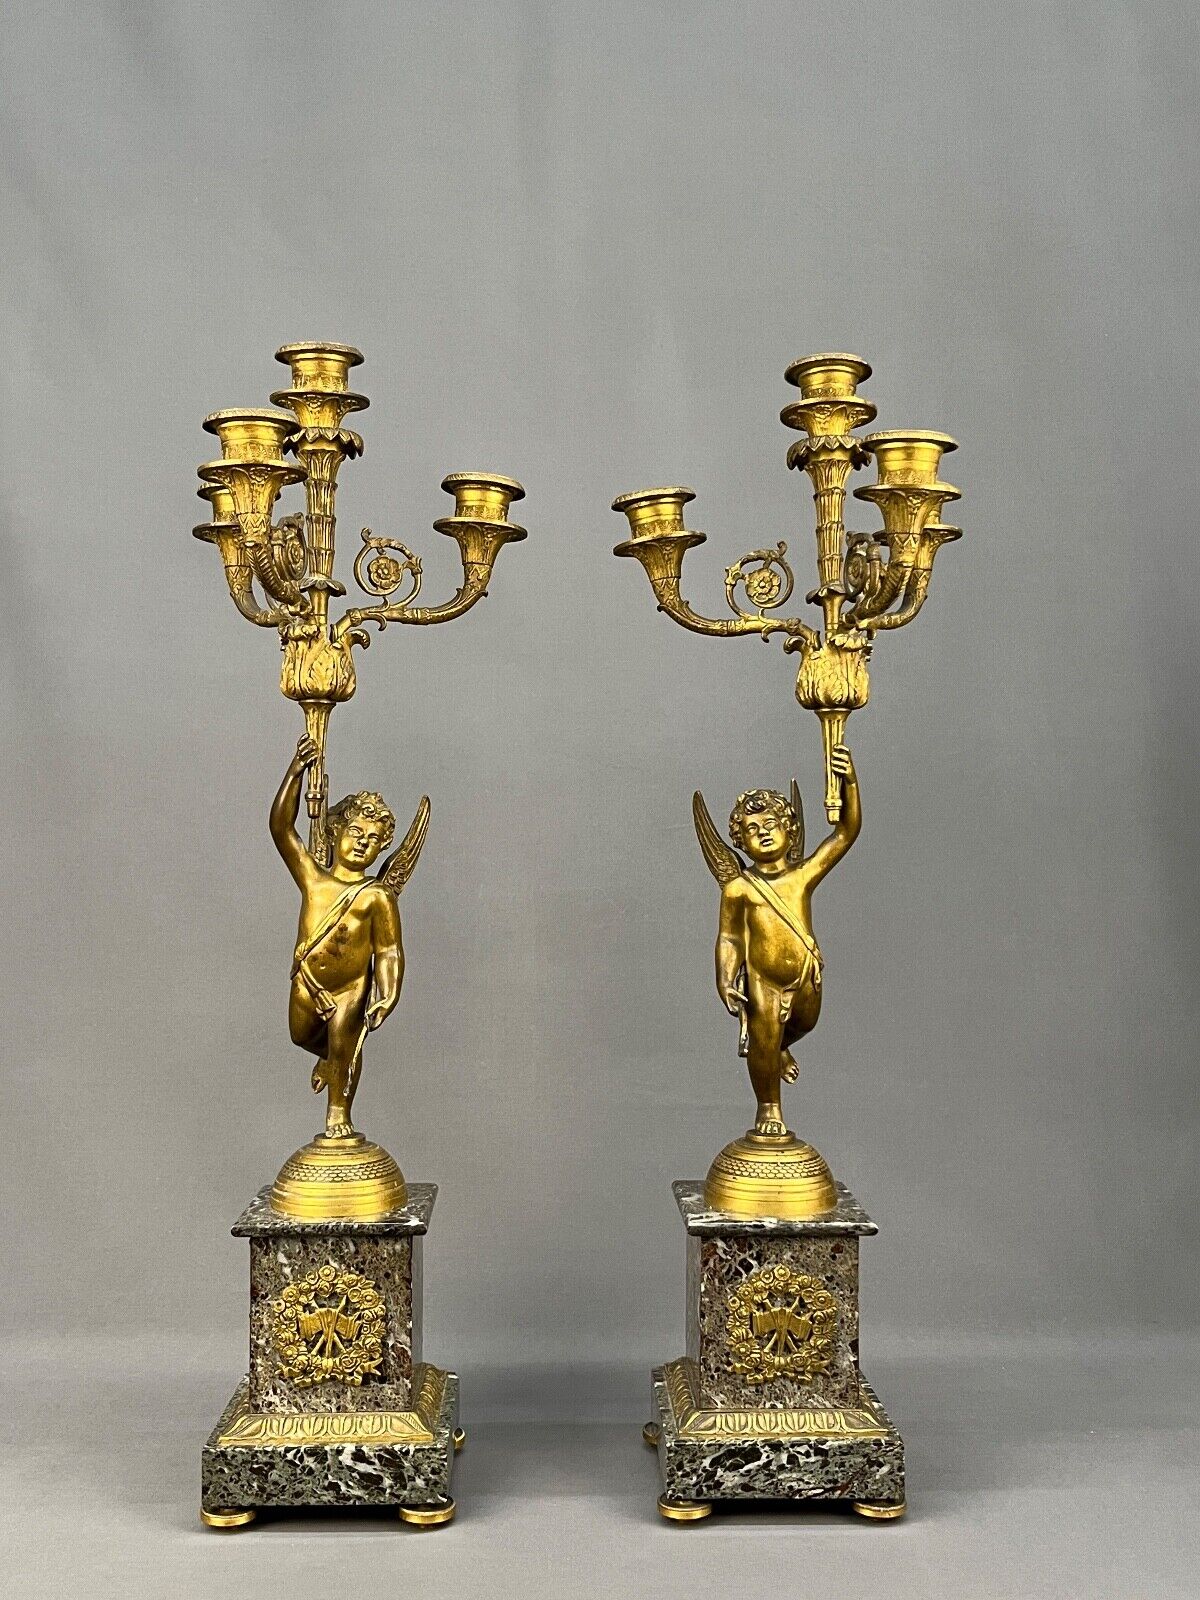 Pair Antique French Empire Style Four-Light Gilt Bronze & Marble Candelabras